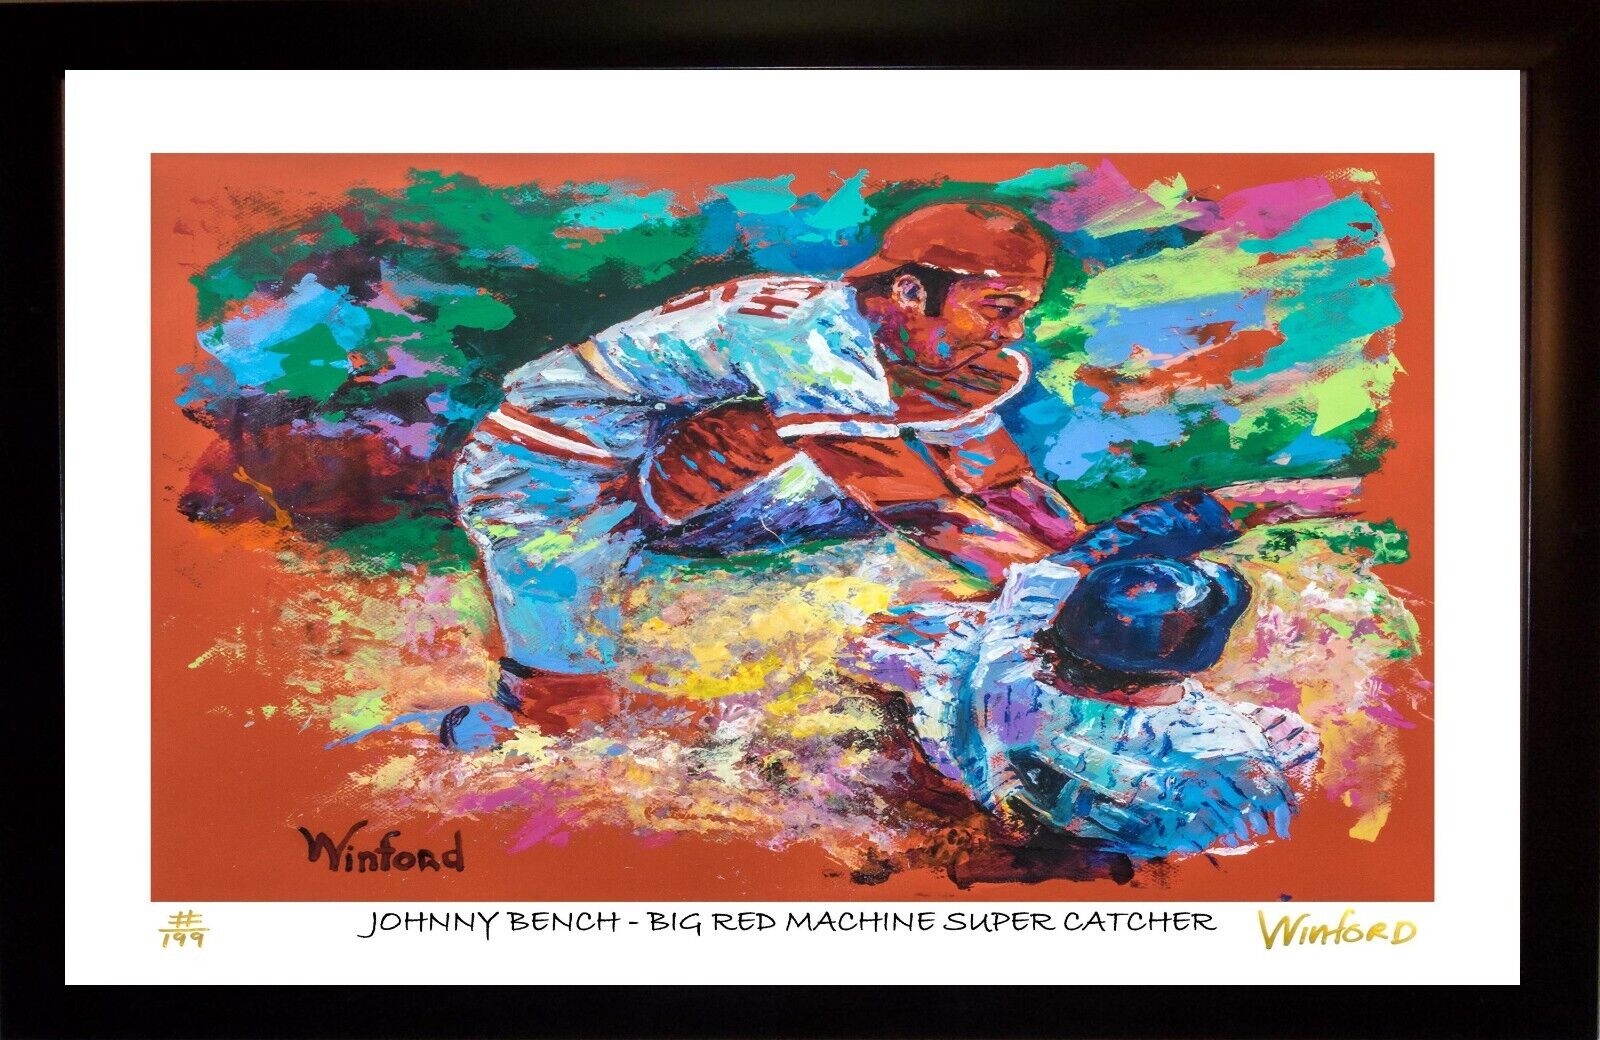 Sale JOHNNY BENCH L.E. Premium Art Print, By Winford Was 99.95 Now 49.95